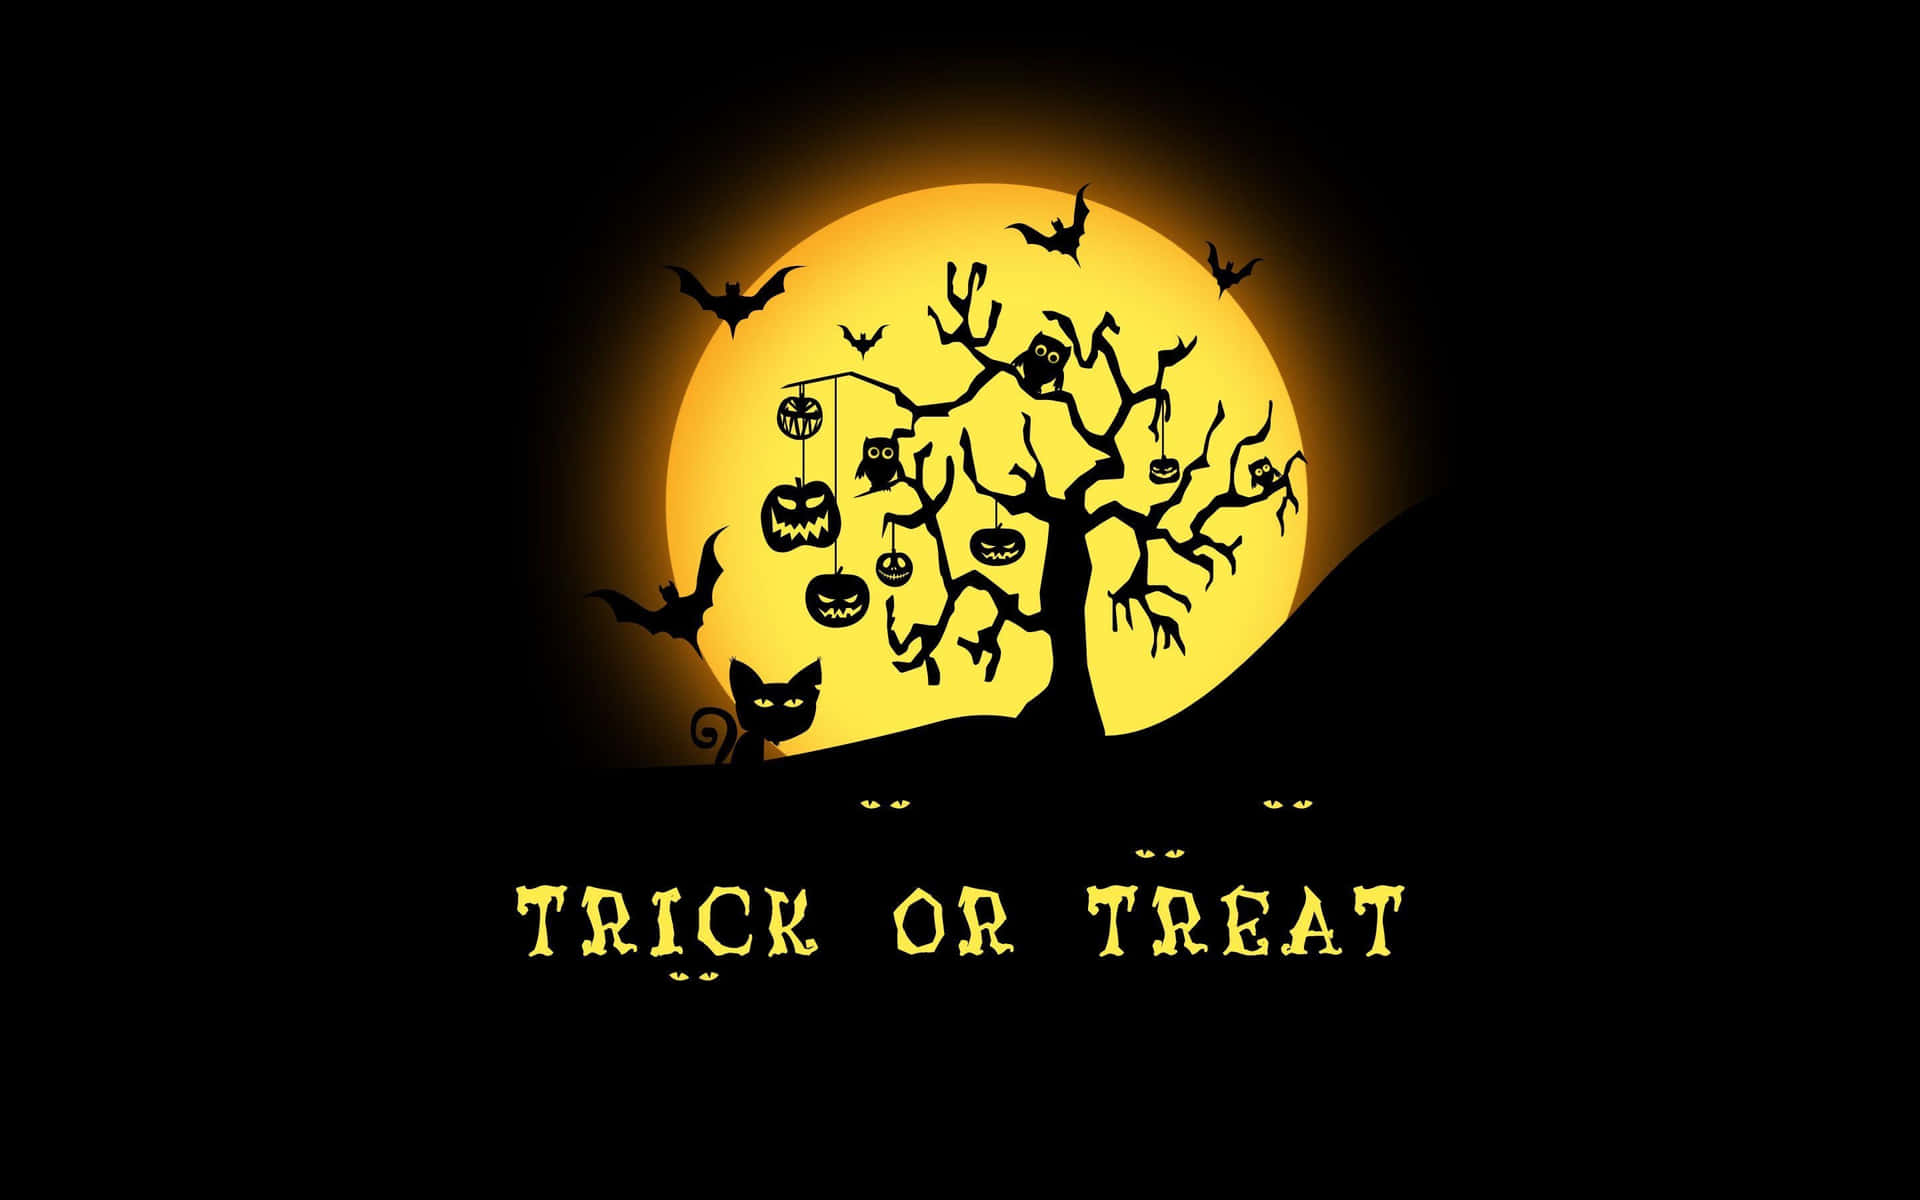 Trick-or-treaters in Halloween costumes Wallpaper